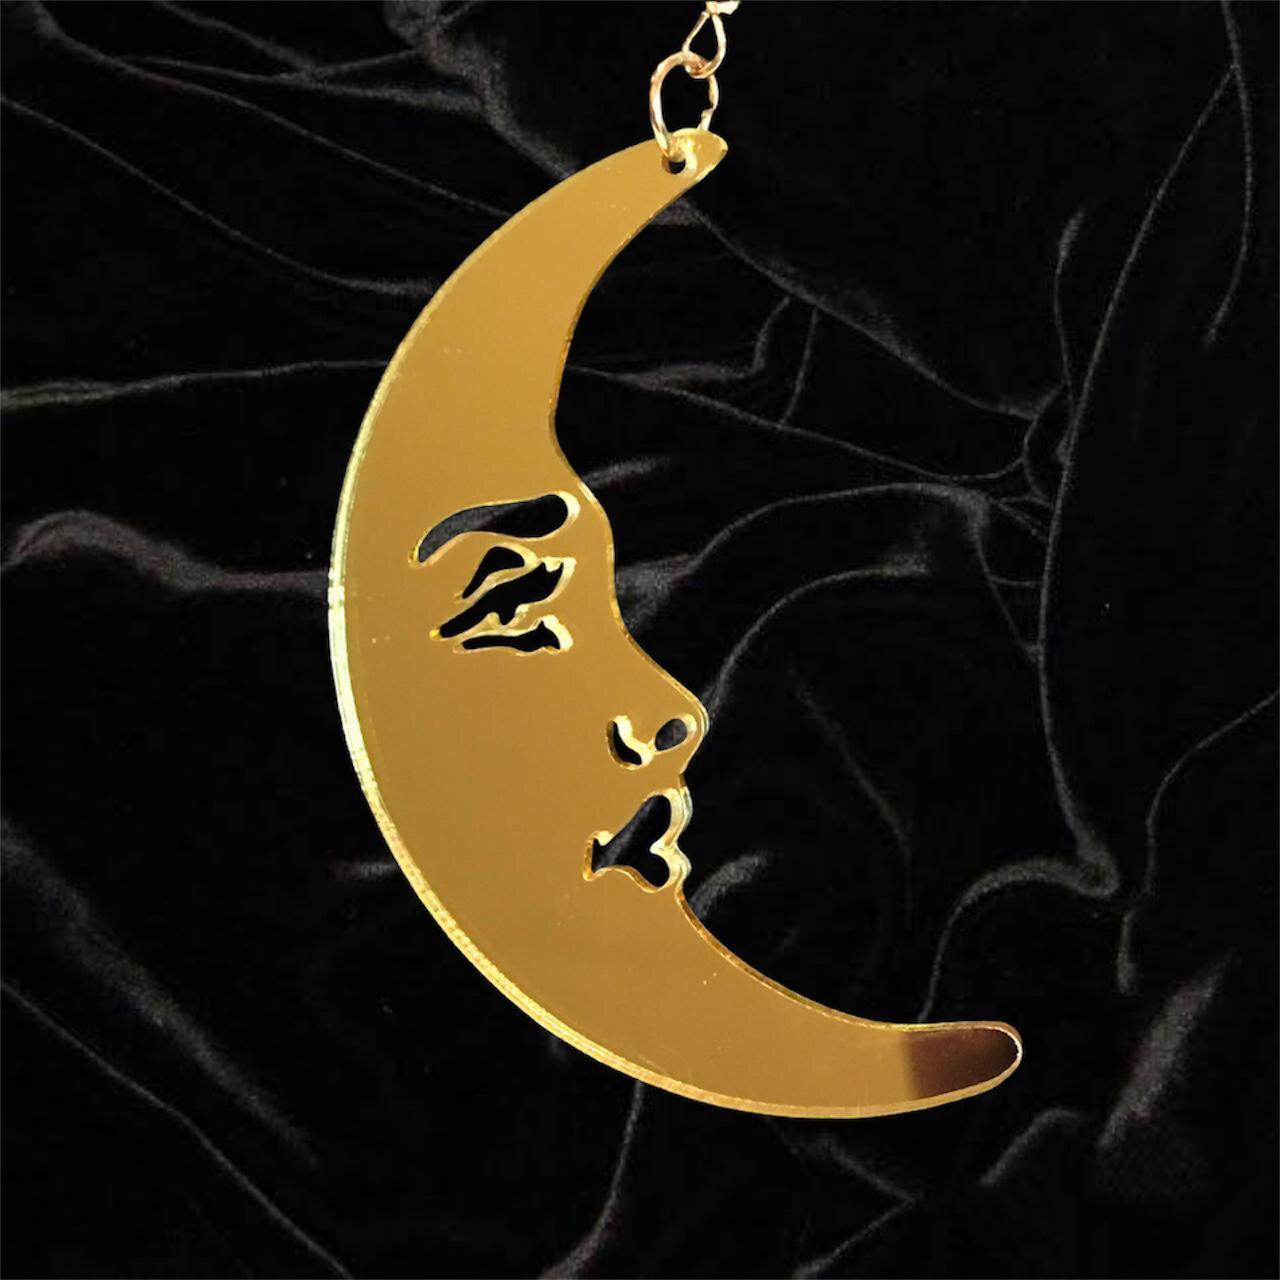 Dear Moon Women's Gold and Yellow Jewellery (2)